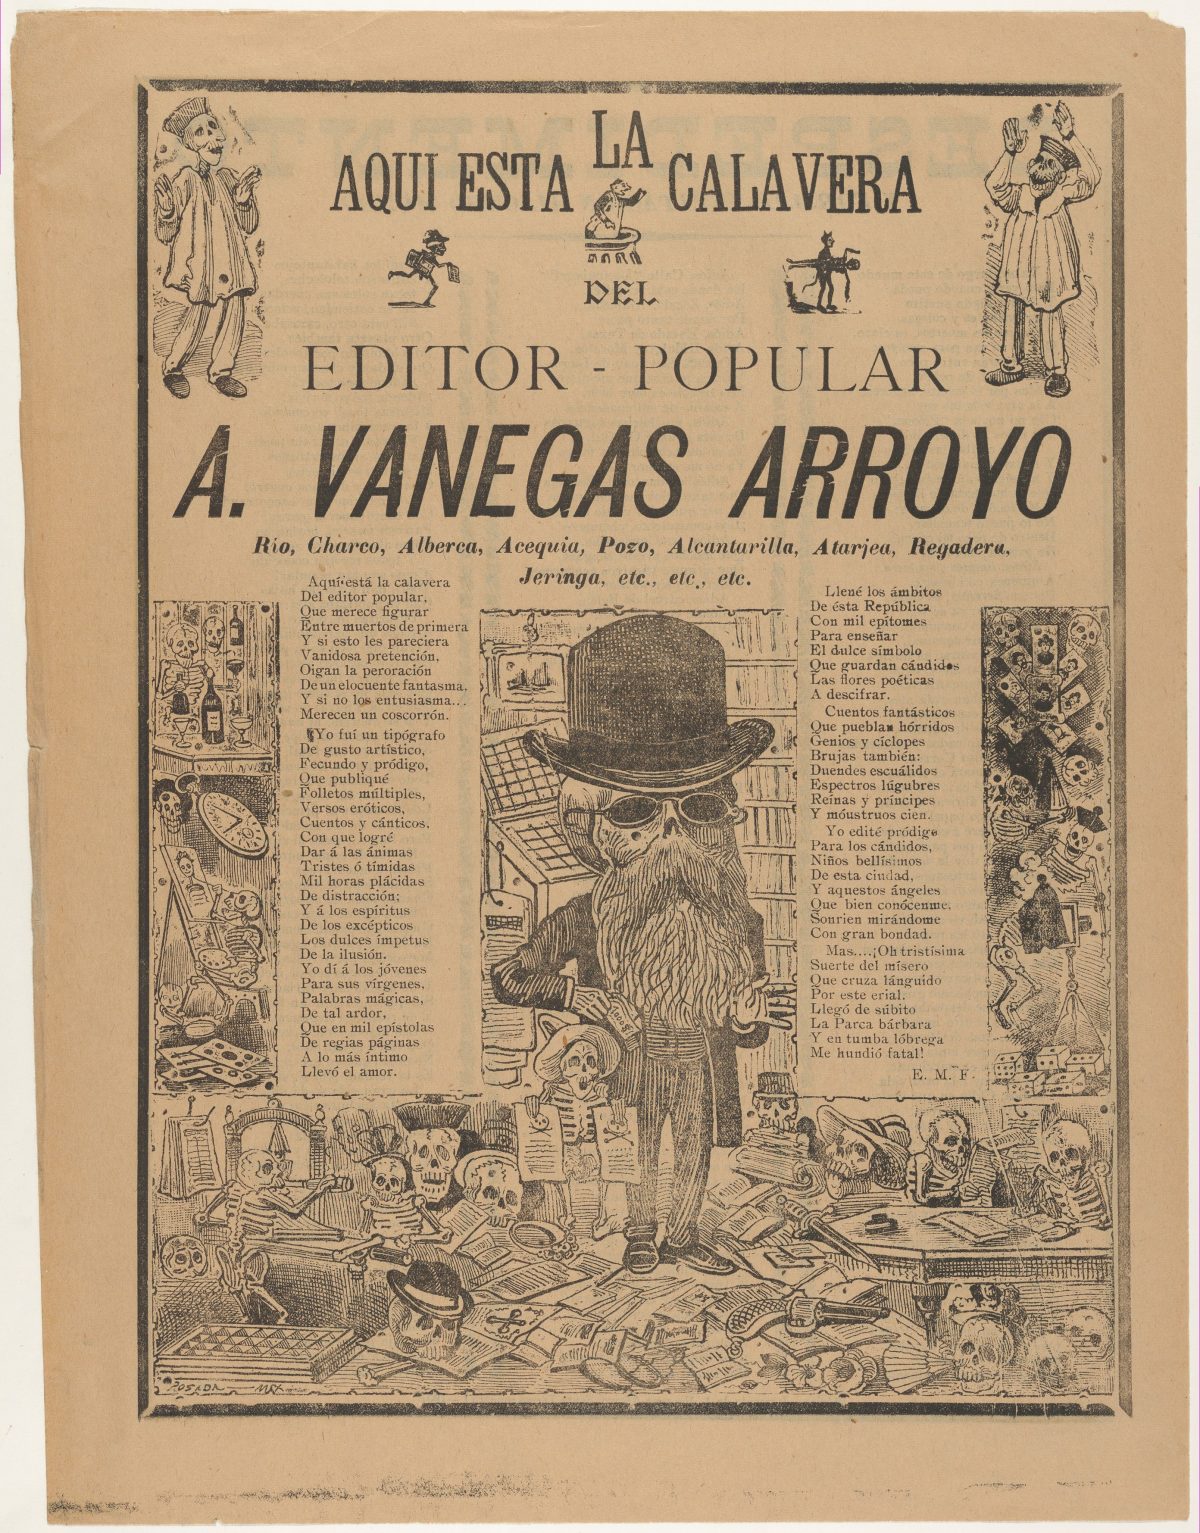 The bearded skeleton wearing a top hat and glasses represents Antonio Vanegas Arroyo, who published many of Posada’s prints. The verses around the image list his range of publications. His commercial success is indicated by the thousand-dollar note clutched in his right hand. Such humorous mocking of a man who was a friend and patron of Posada is part of the semi-satirical tradition of the calavera (skeleton). The two scenes behind Vanegas Arroyo reflect aspects of his profession. The shop in the upper section represents the commercial side of his profession. Below are skeletons in a workshop engaged in proofreading and operating the press.